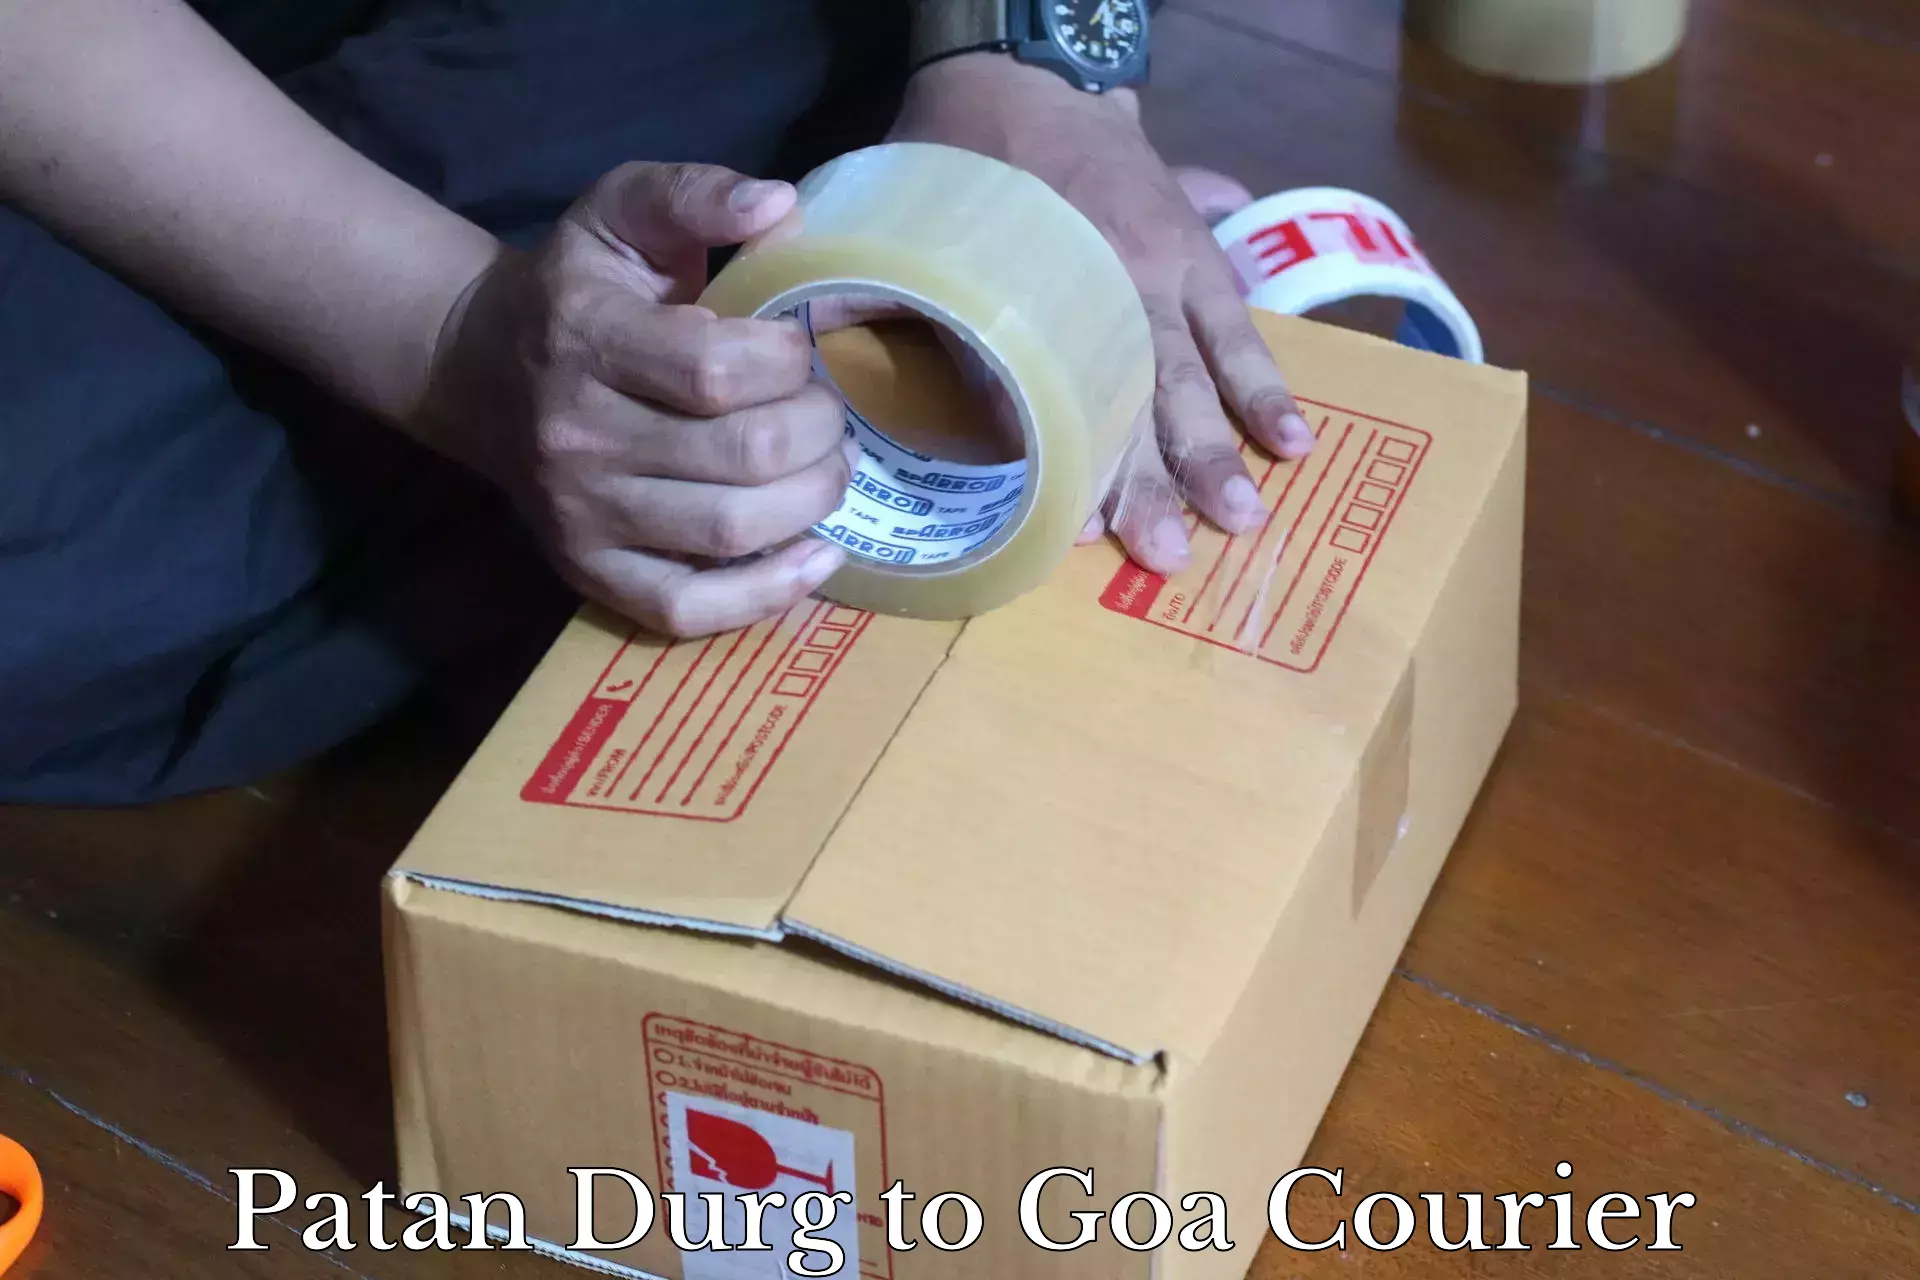 International courier networks Patan Durg to Goa